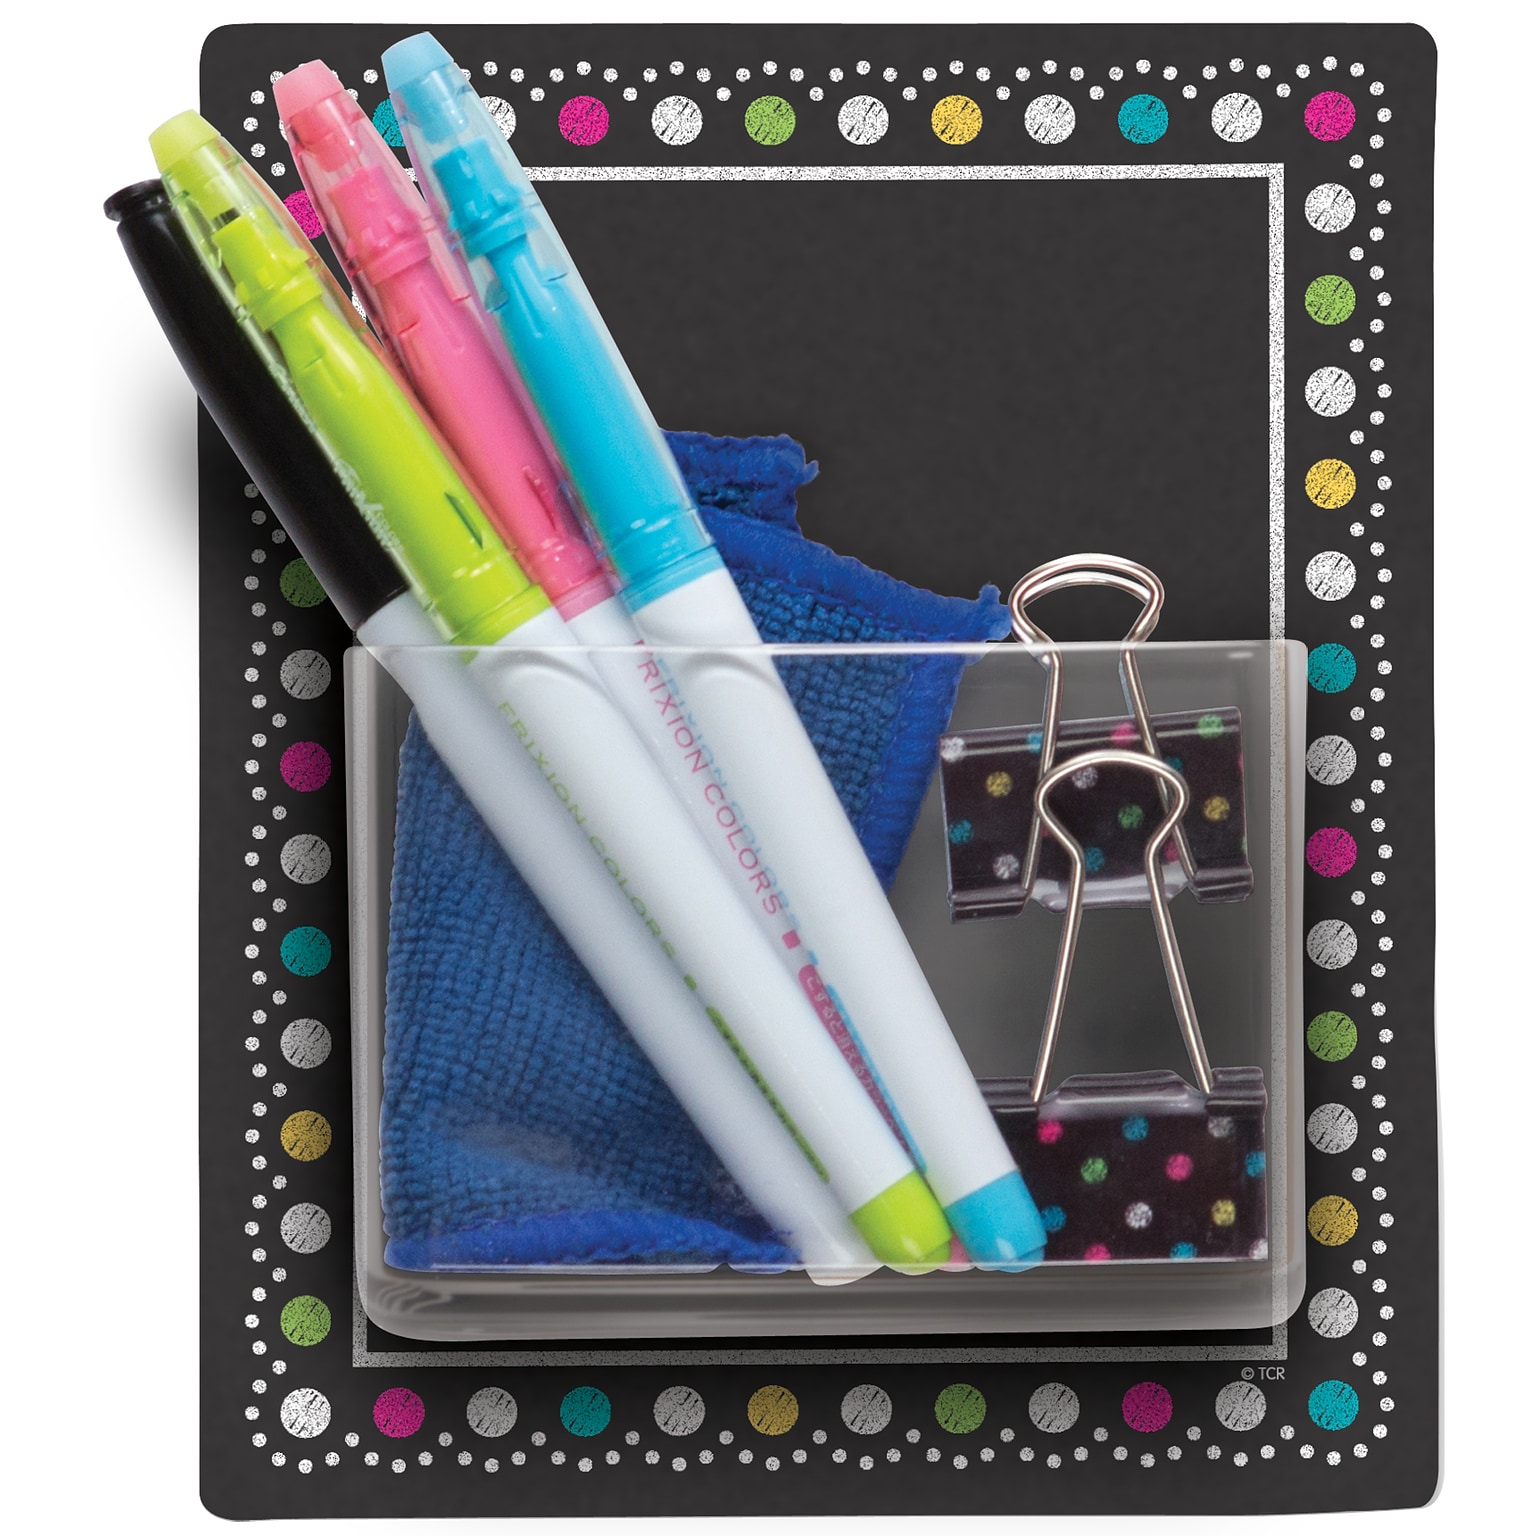 Teacher Created Resources Clingy Thingies Storage Pockets, 1D x 5.125W x 6.25H, Chalkboard Brights, Pack of 3 (TCR77377-3)